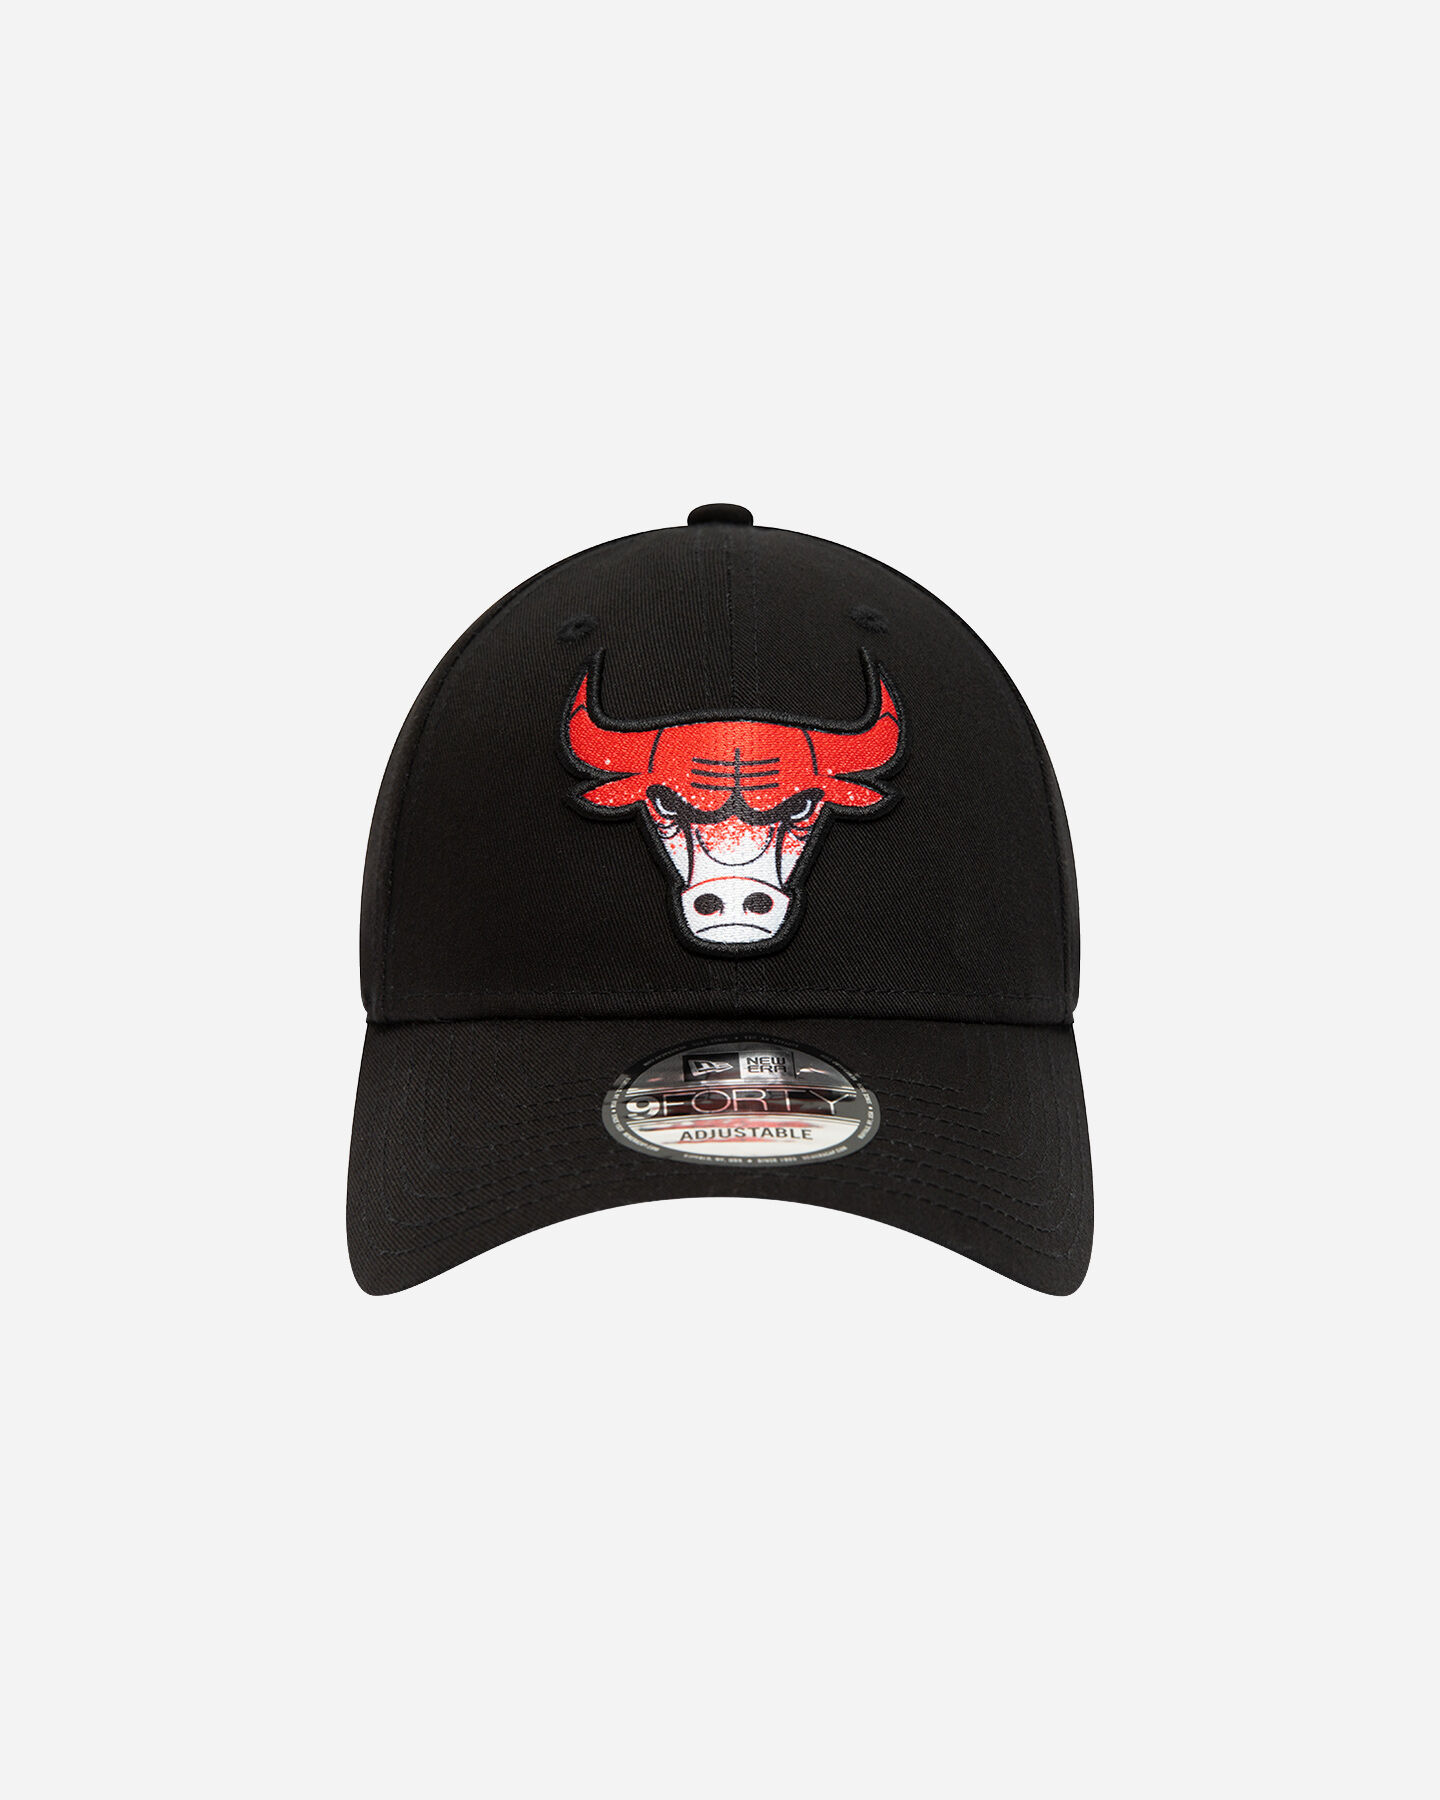  Cappellino NEW ERA 9FORTY INFILL CHICAGO BULLS  S5546153|001|OSFM scatto 1